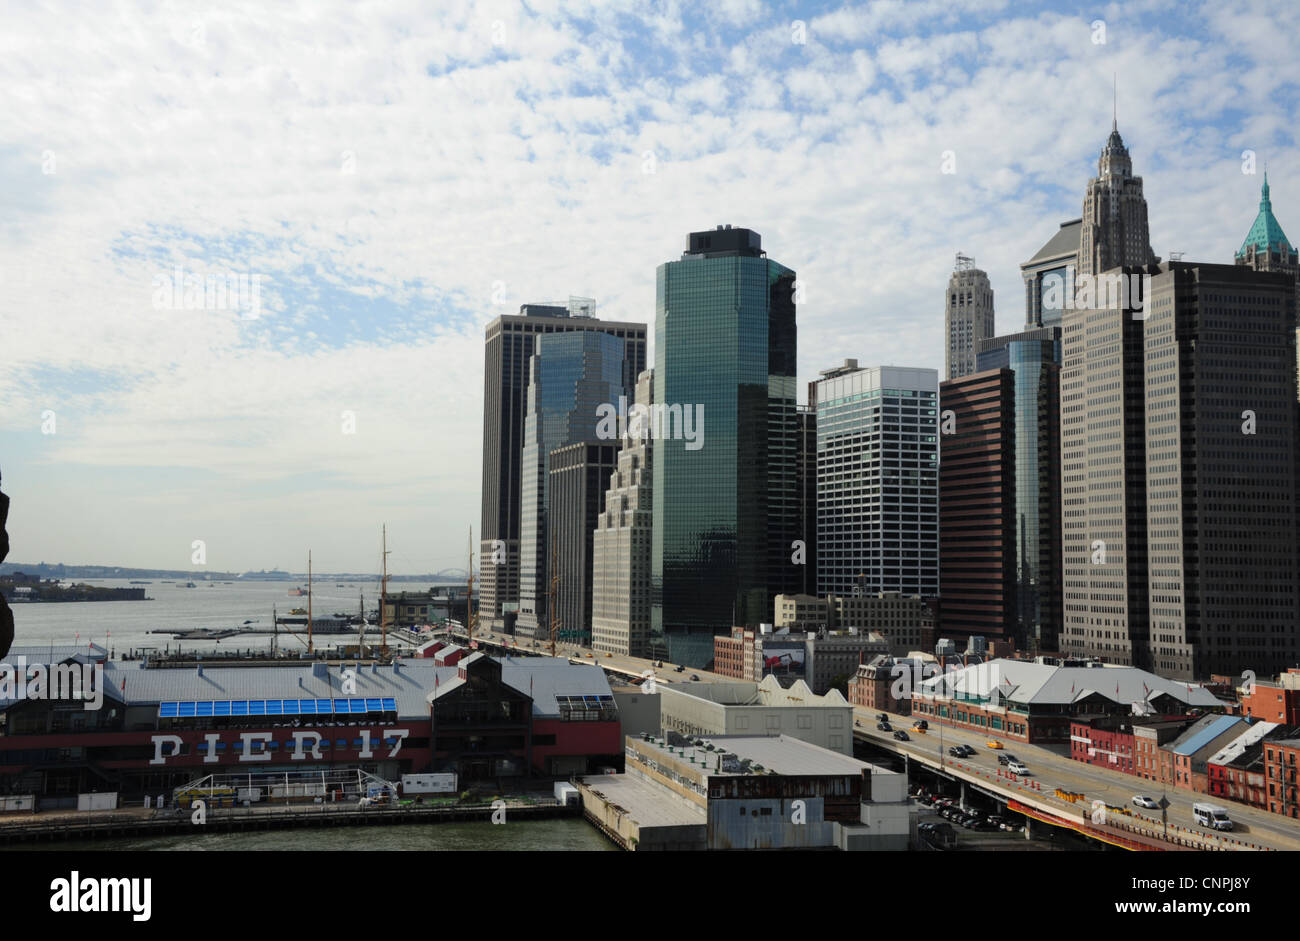 Autumn sky view, from Brooklyn Bridge, Pier 17 seaport, FDR Drive, Lower Manhattan Financial District skyscrapers, New York Stock Photo